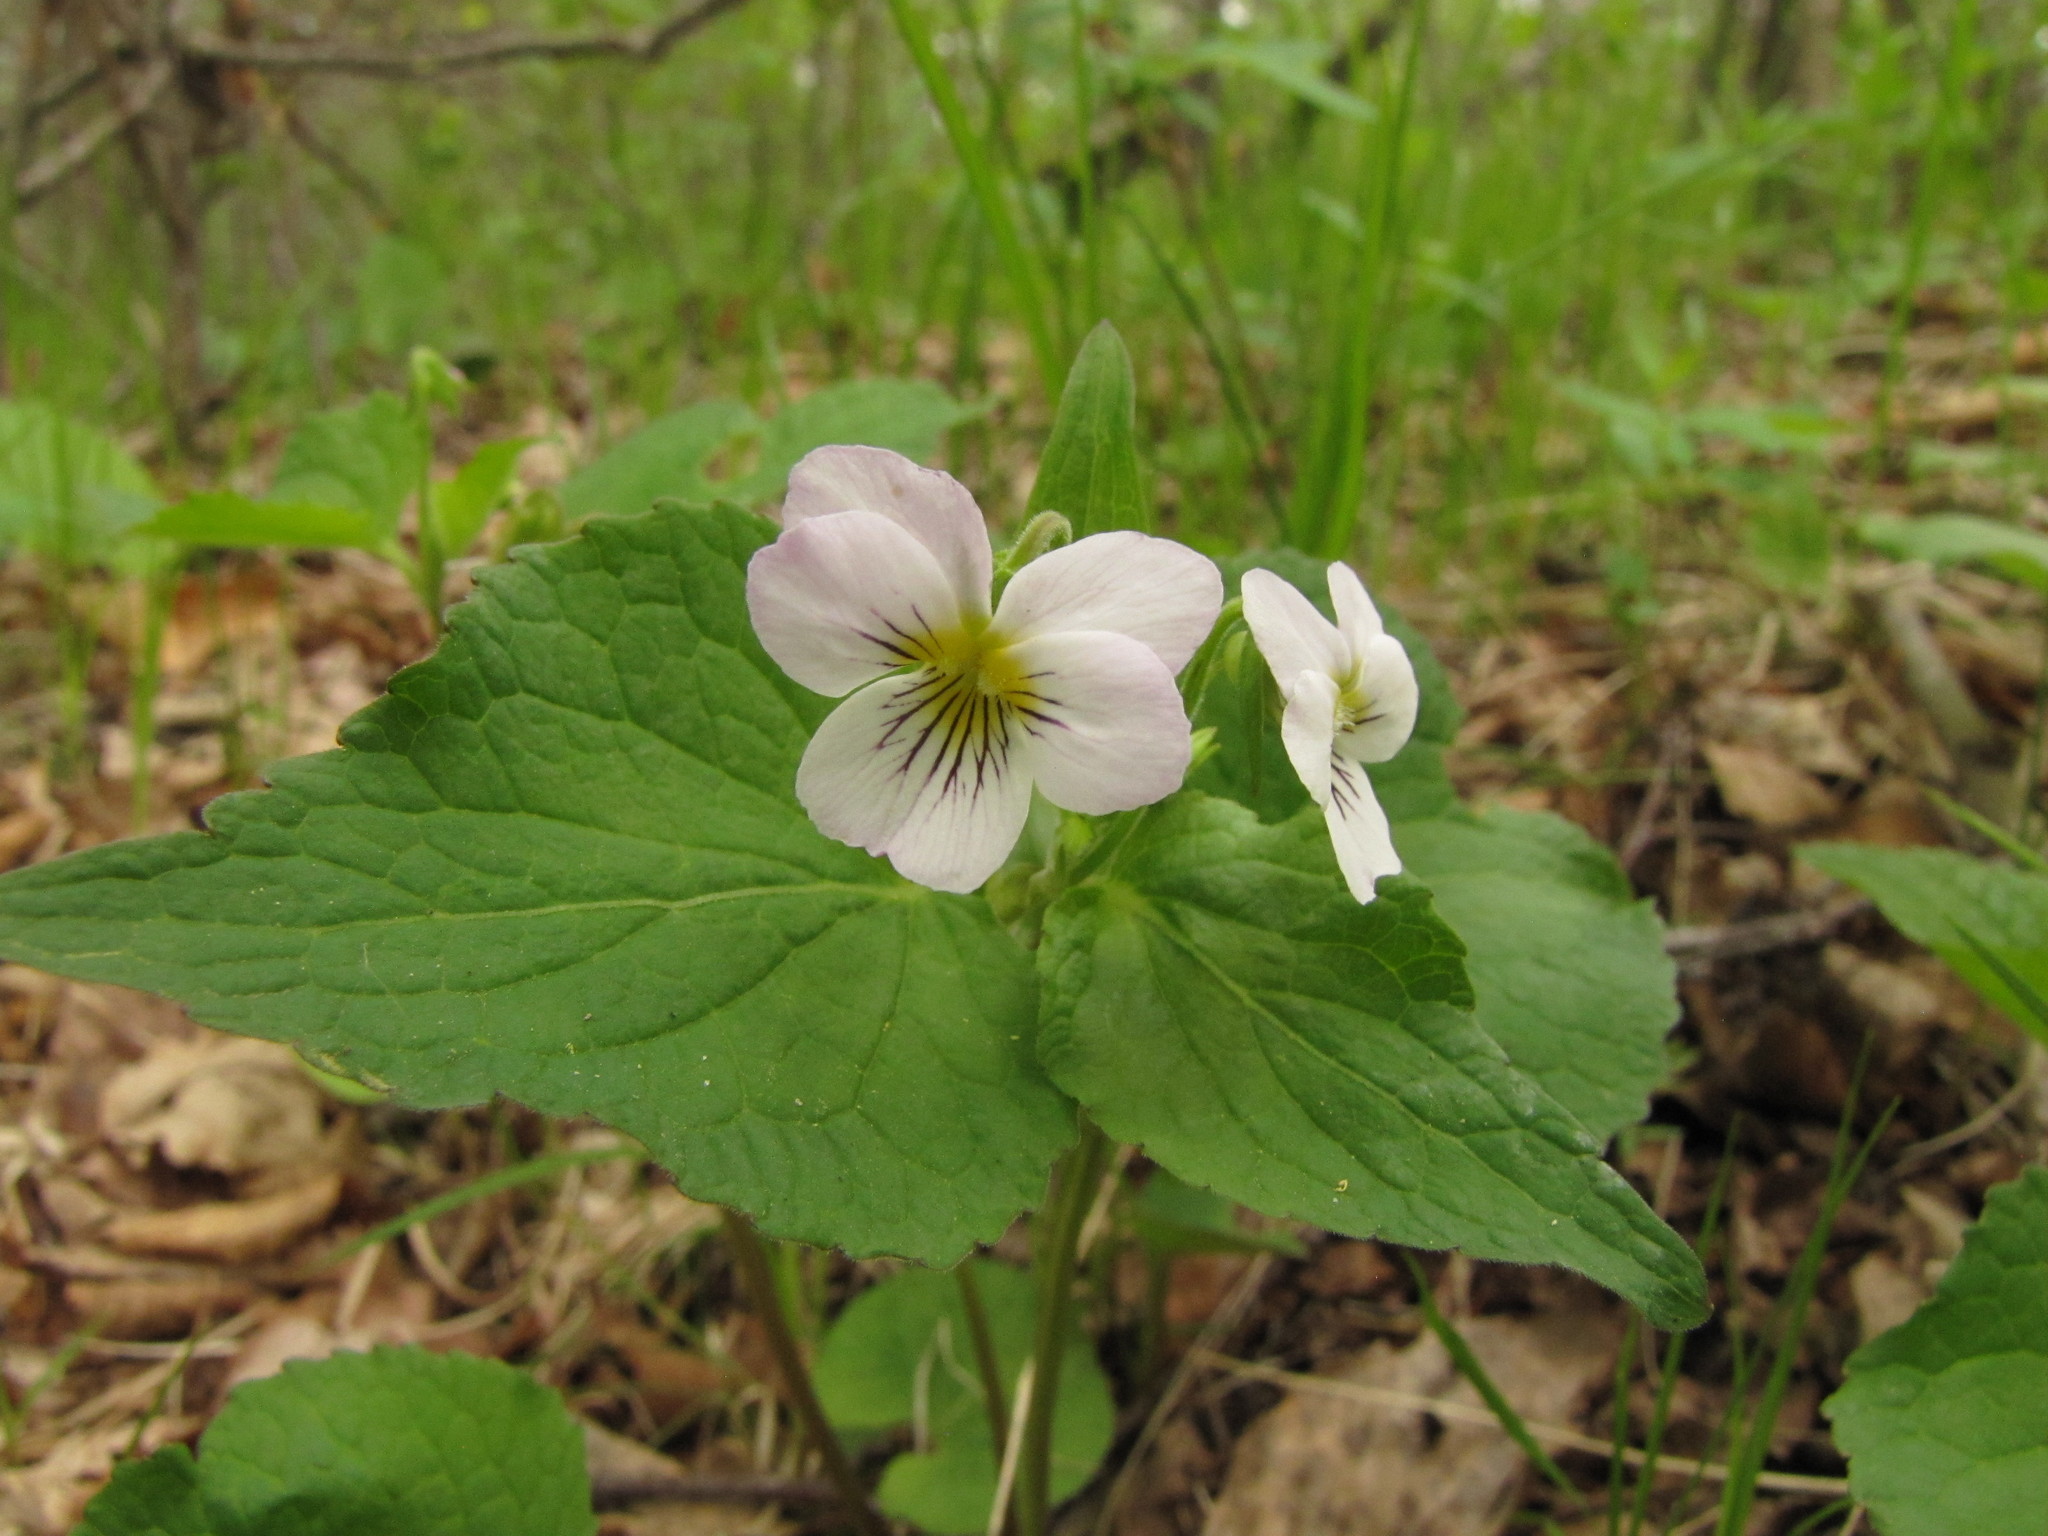 A Canada white violet plant on the forest floor. It has large green leaves and small white flowers with five petals each.